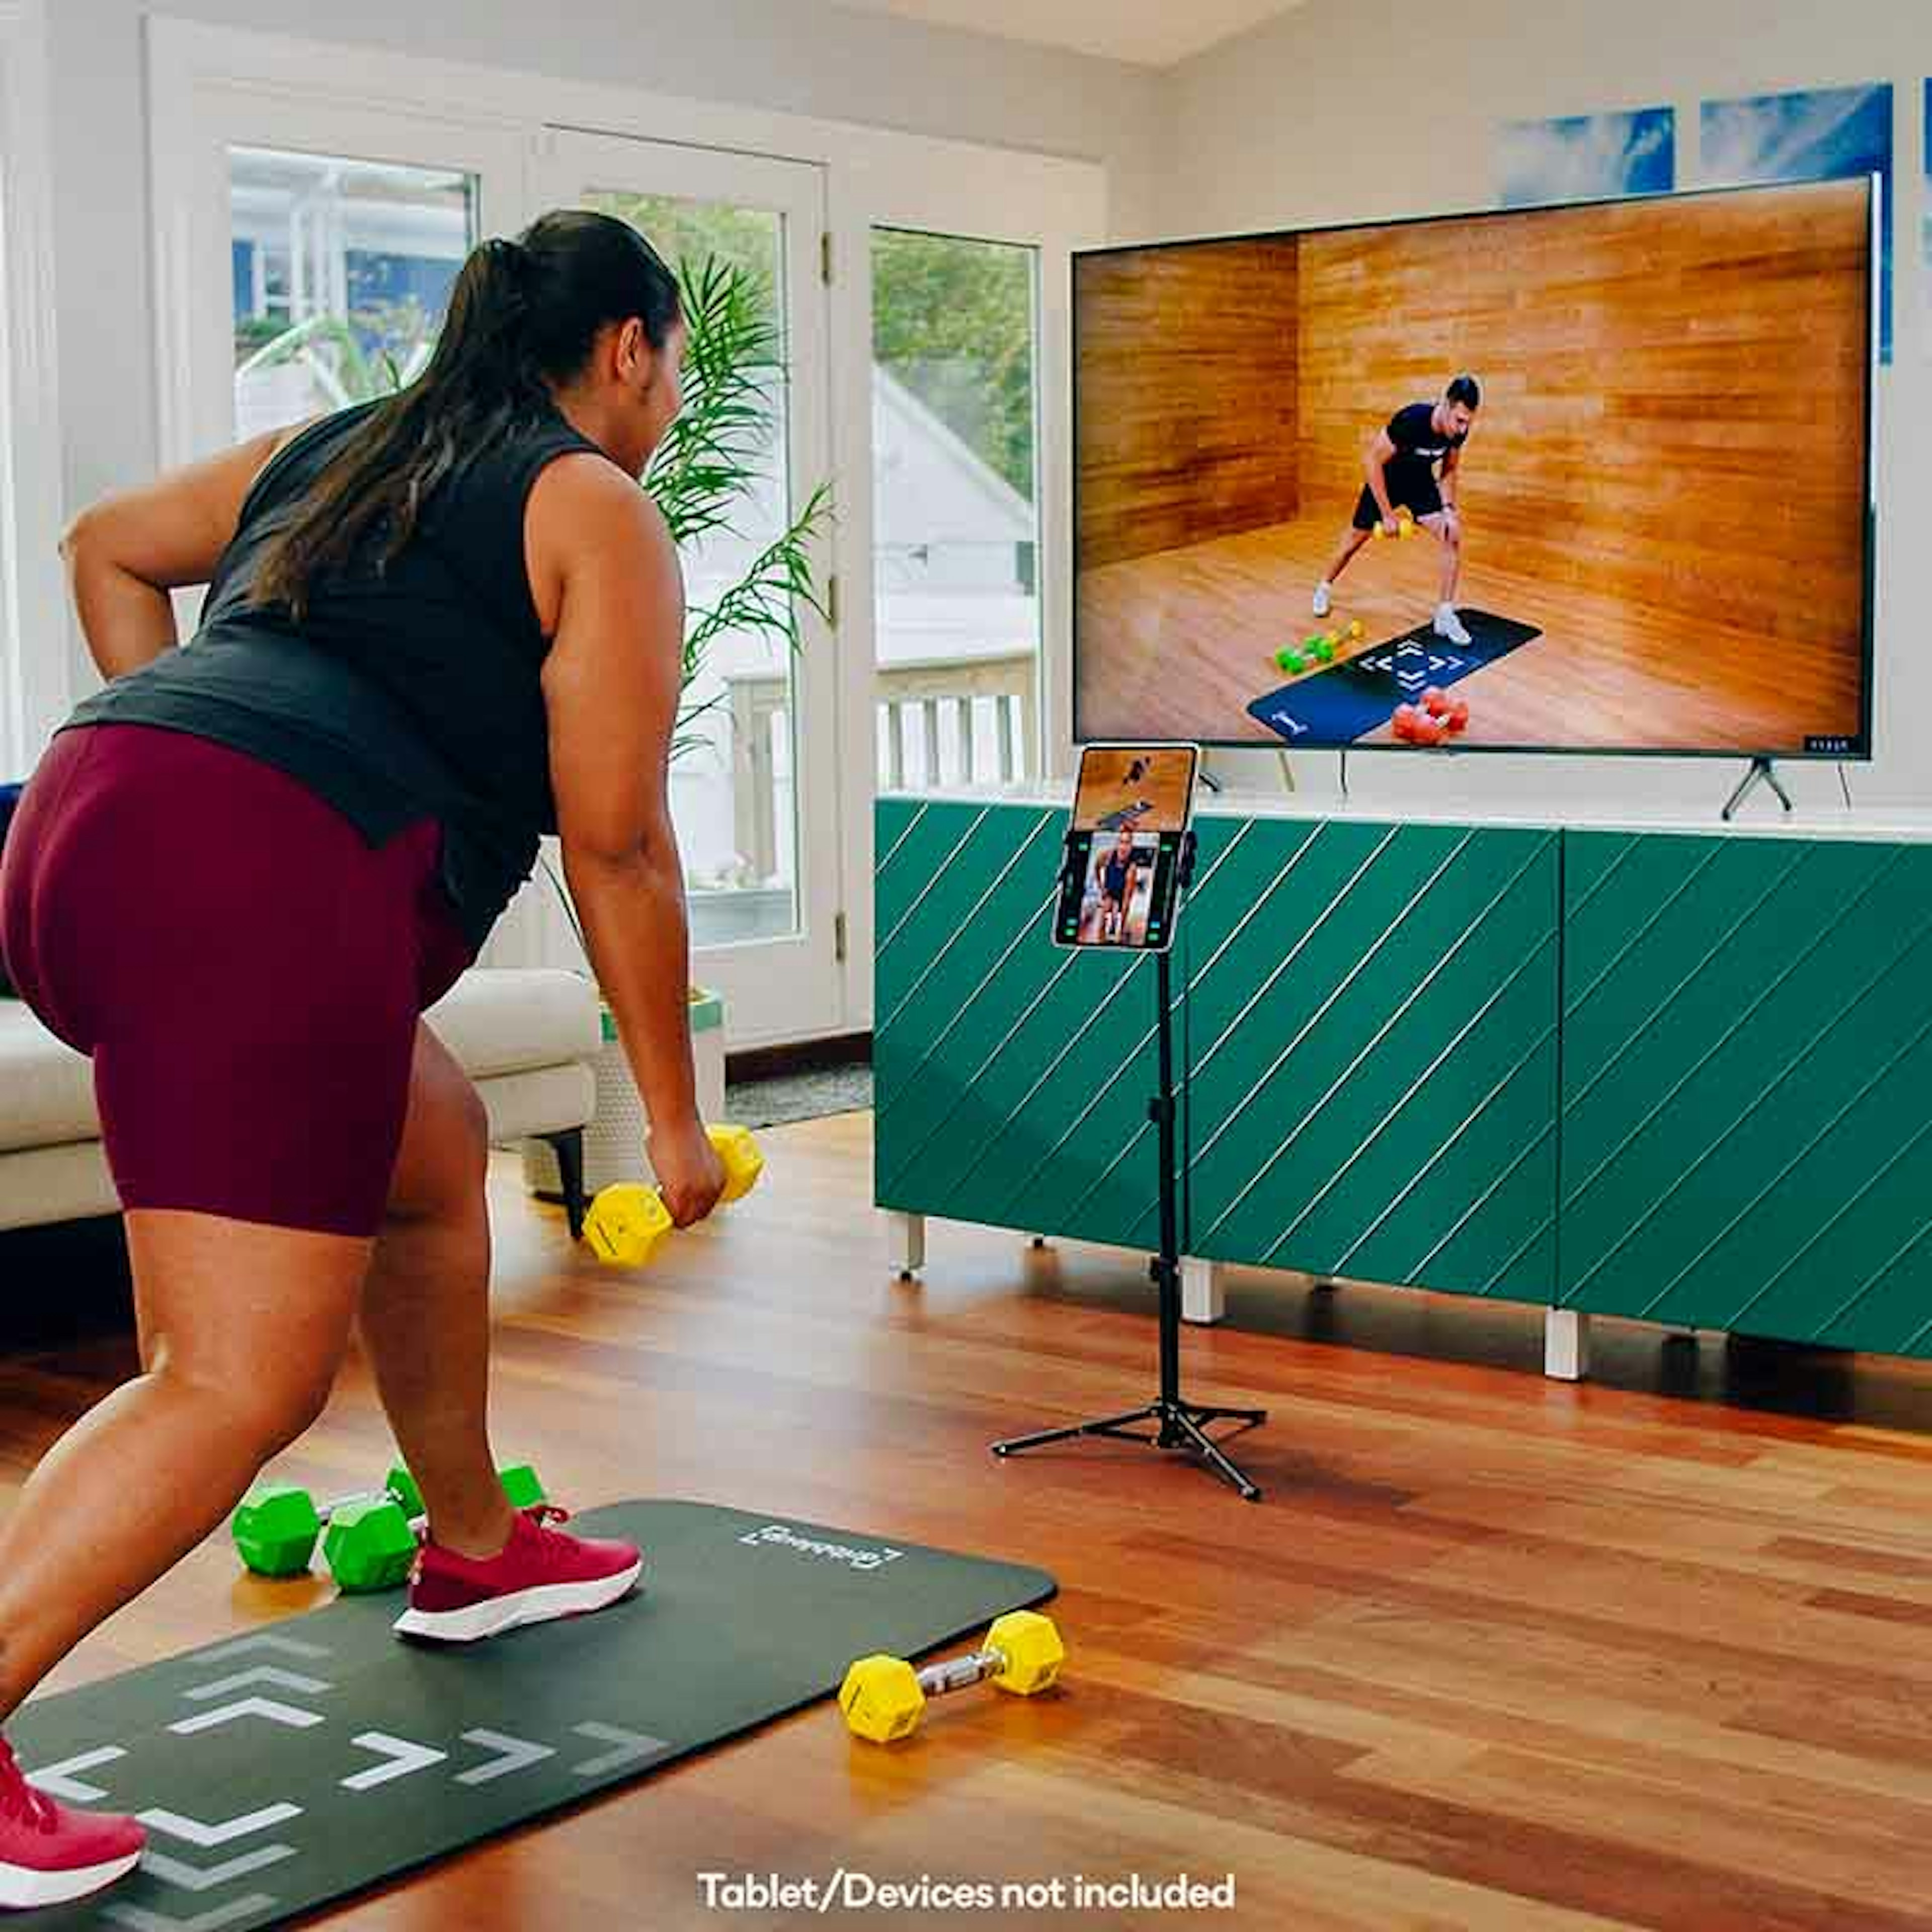 Unlock Your Fitness Goals by Streaming Free Workouts on Your TV - CNET